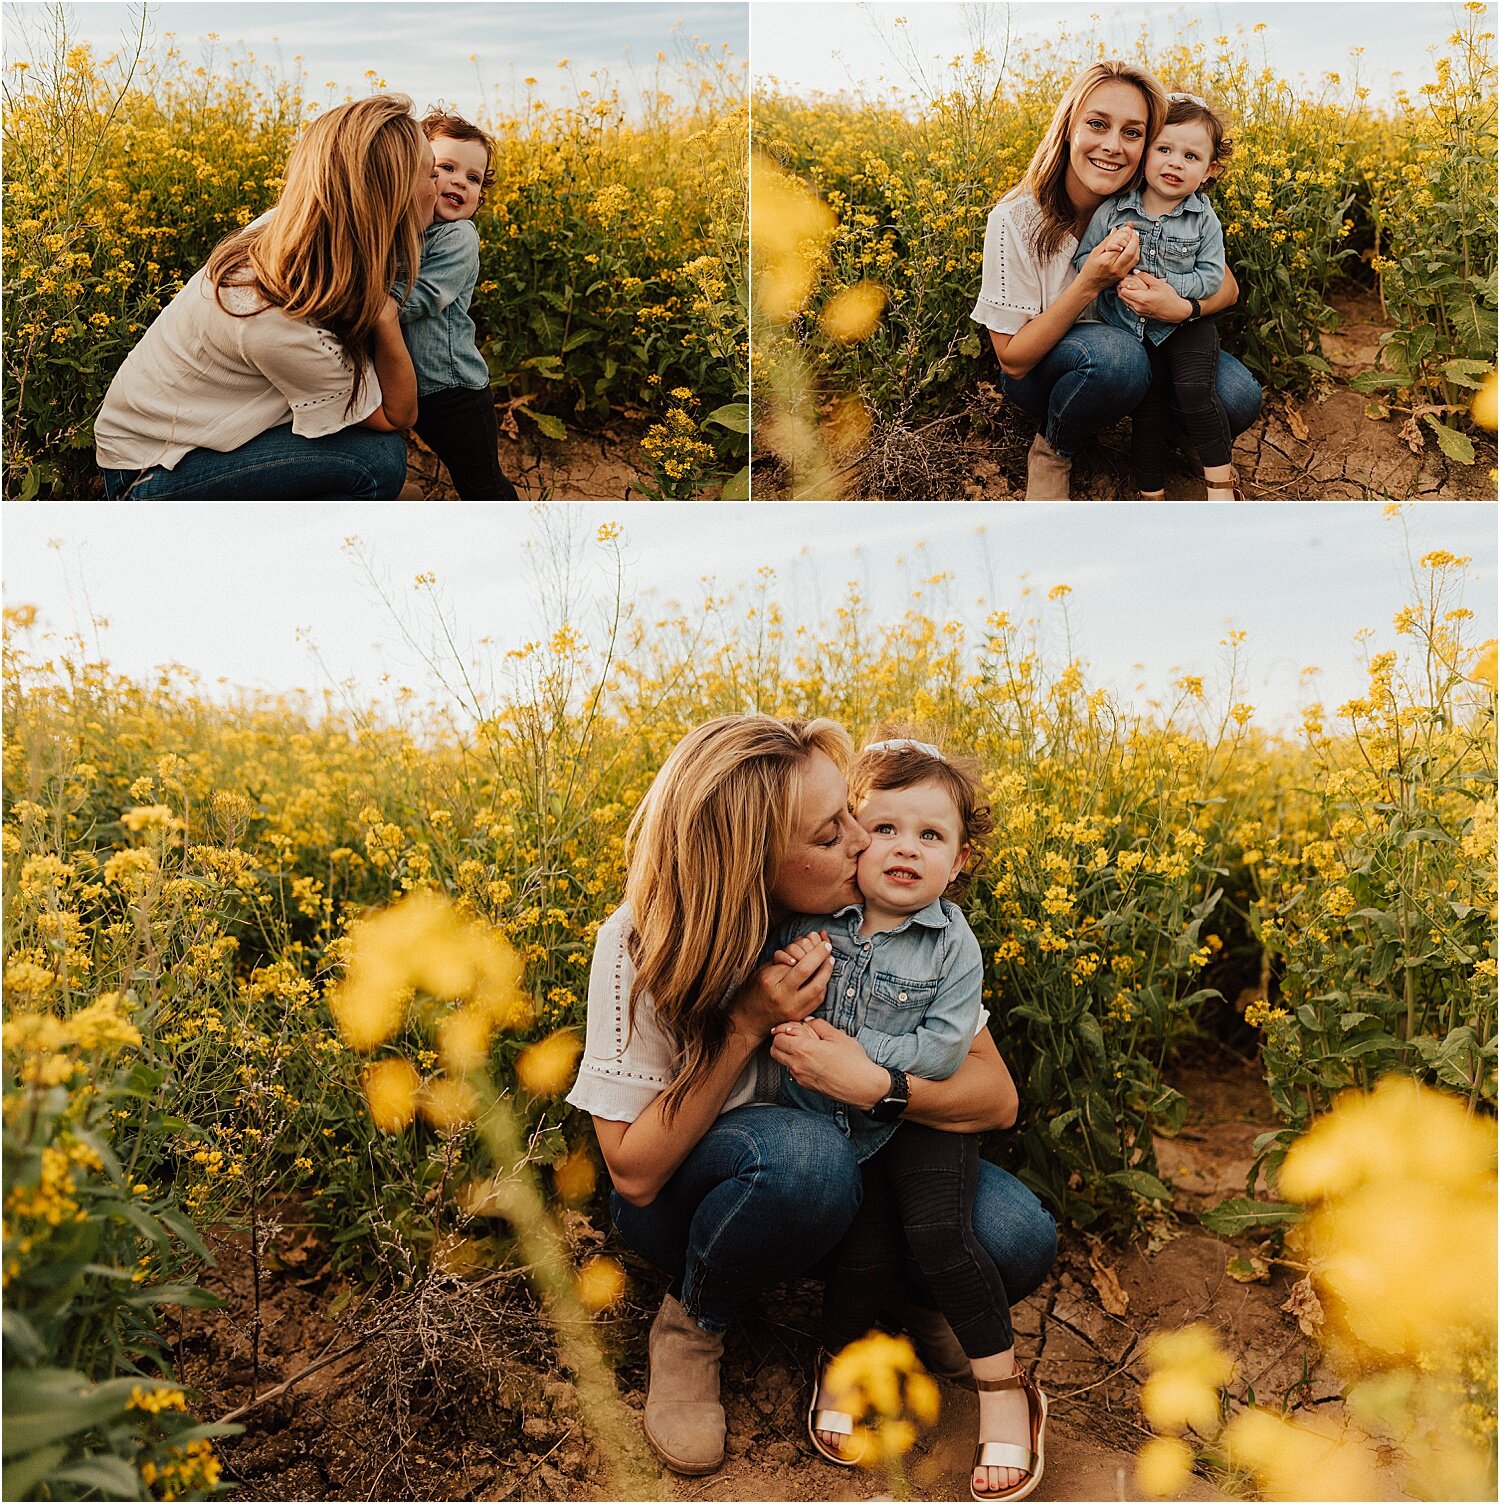 spring field of yellow flowers family session28.jpg